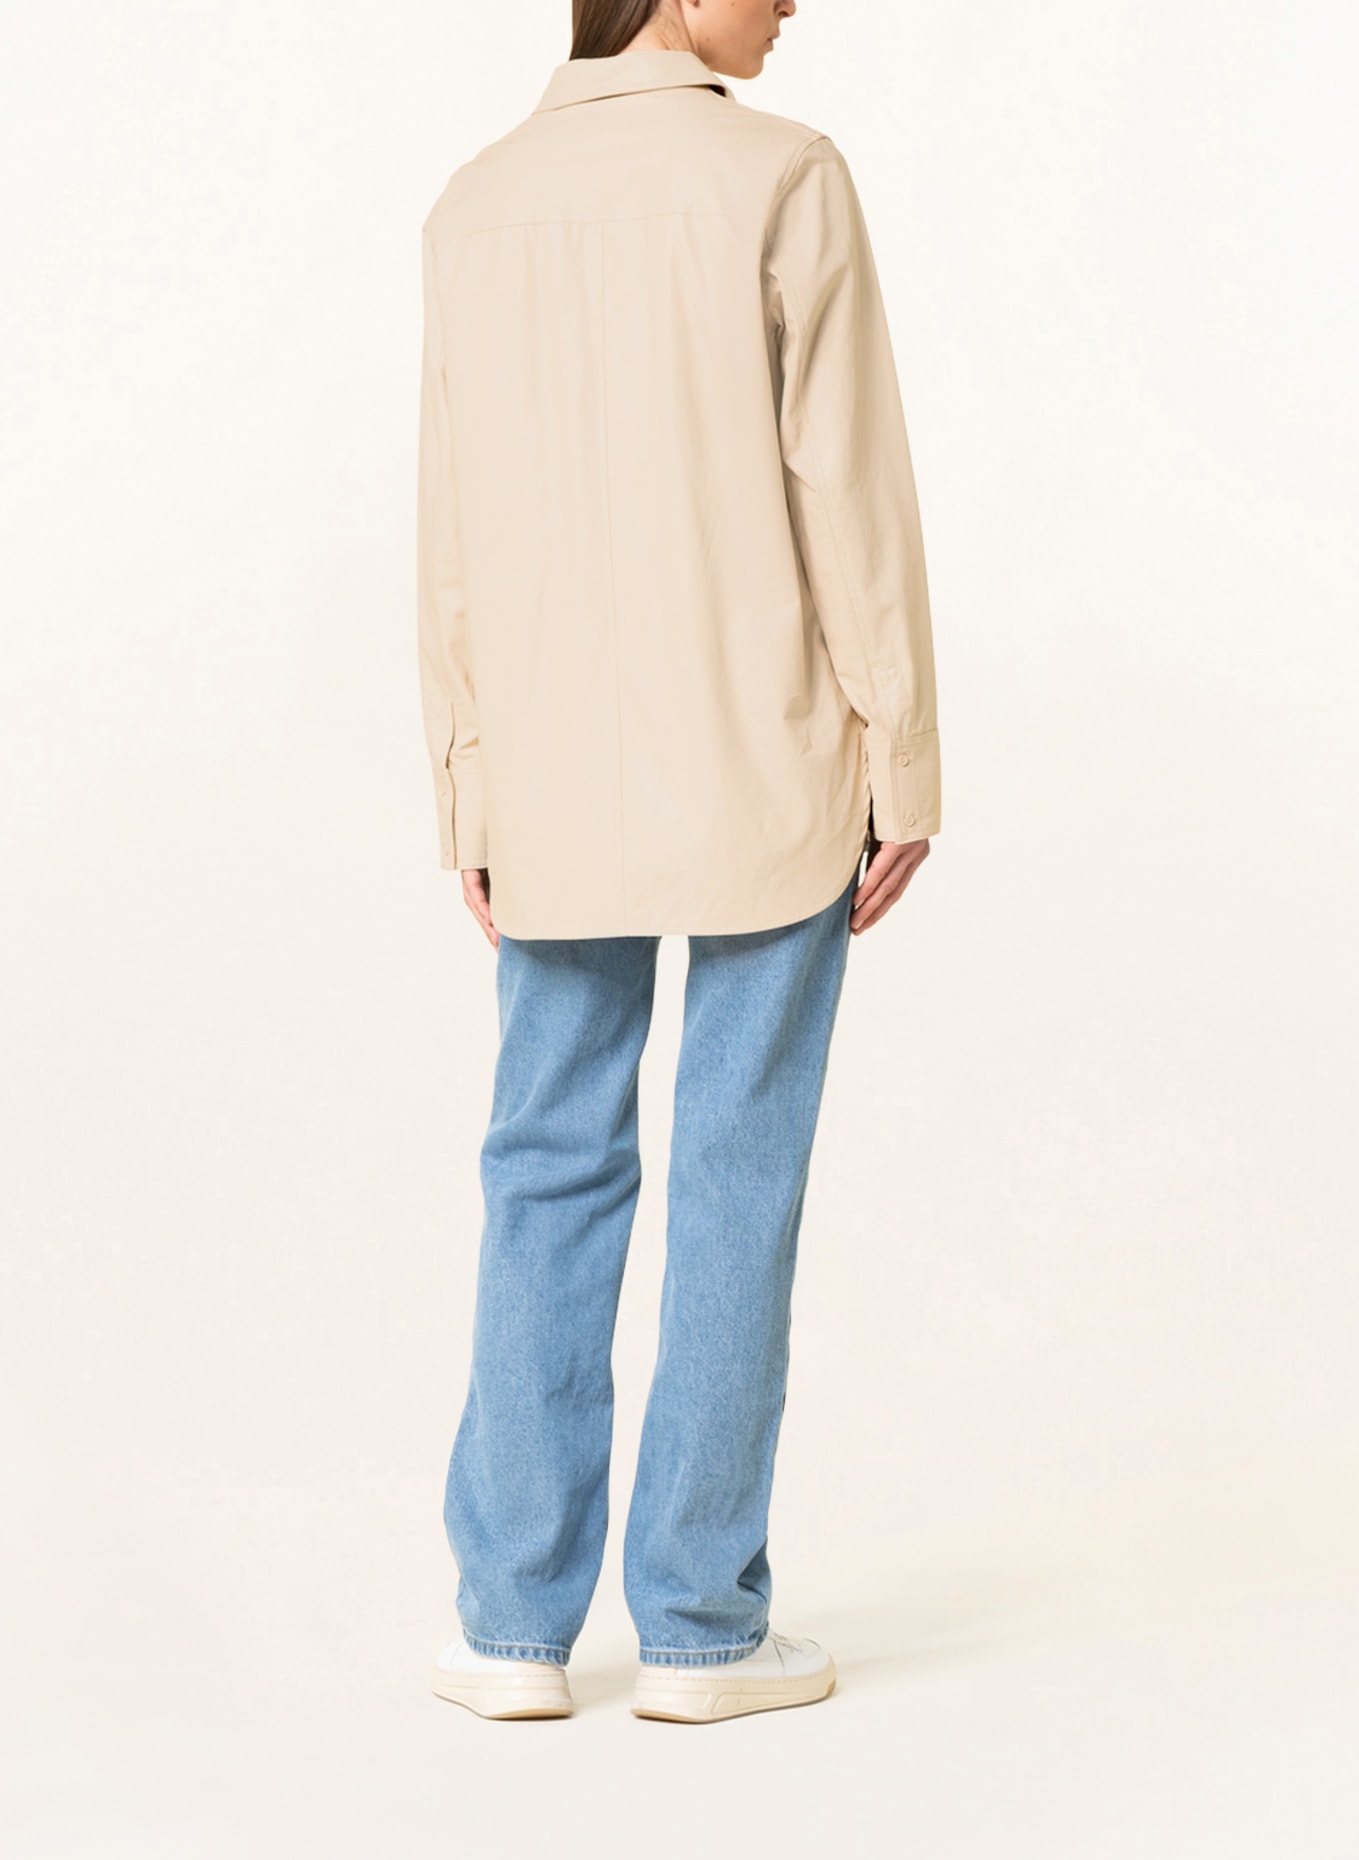 STAND STUDIO Shirt blouse MARITA in leather look, Color: BEIGE (Image 3)